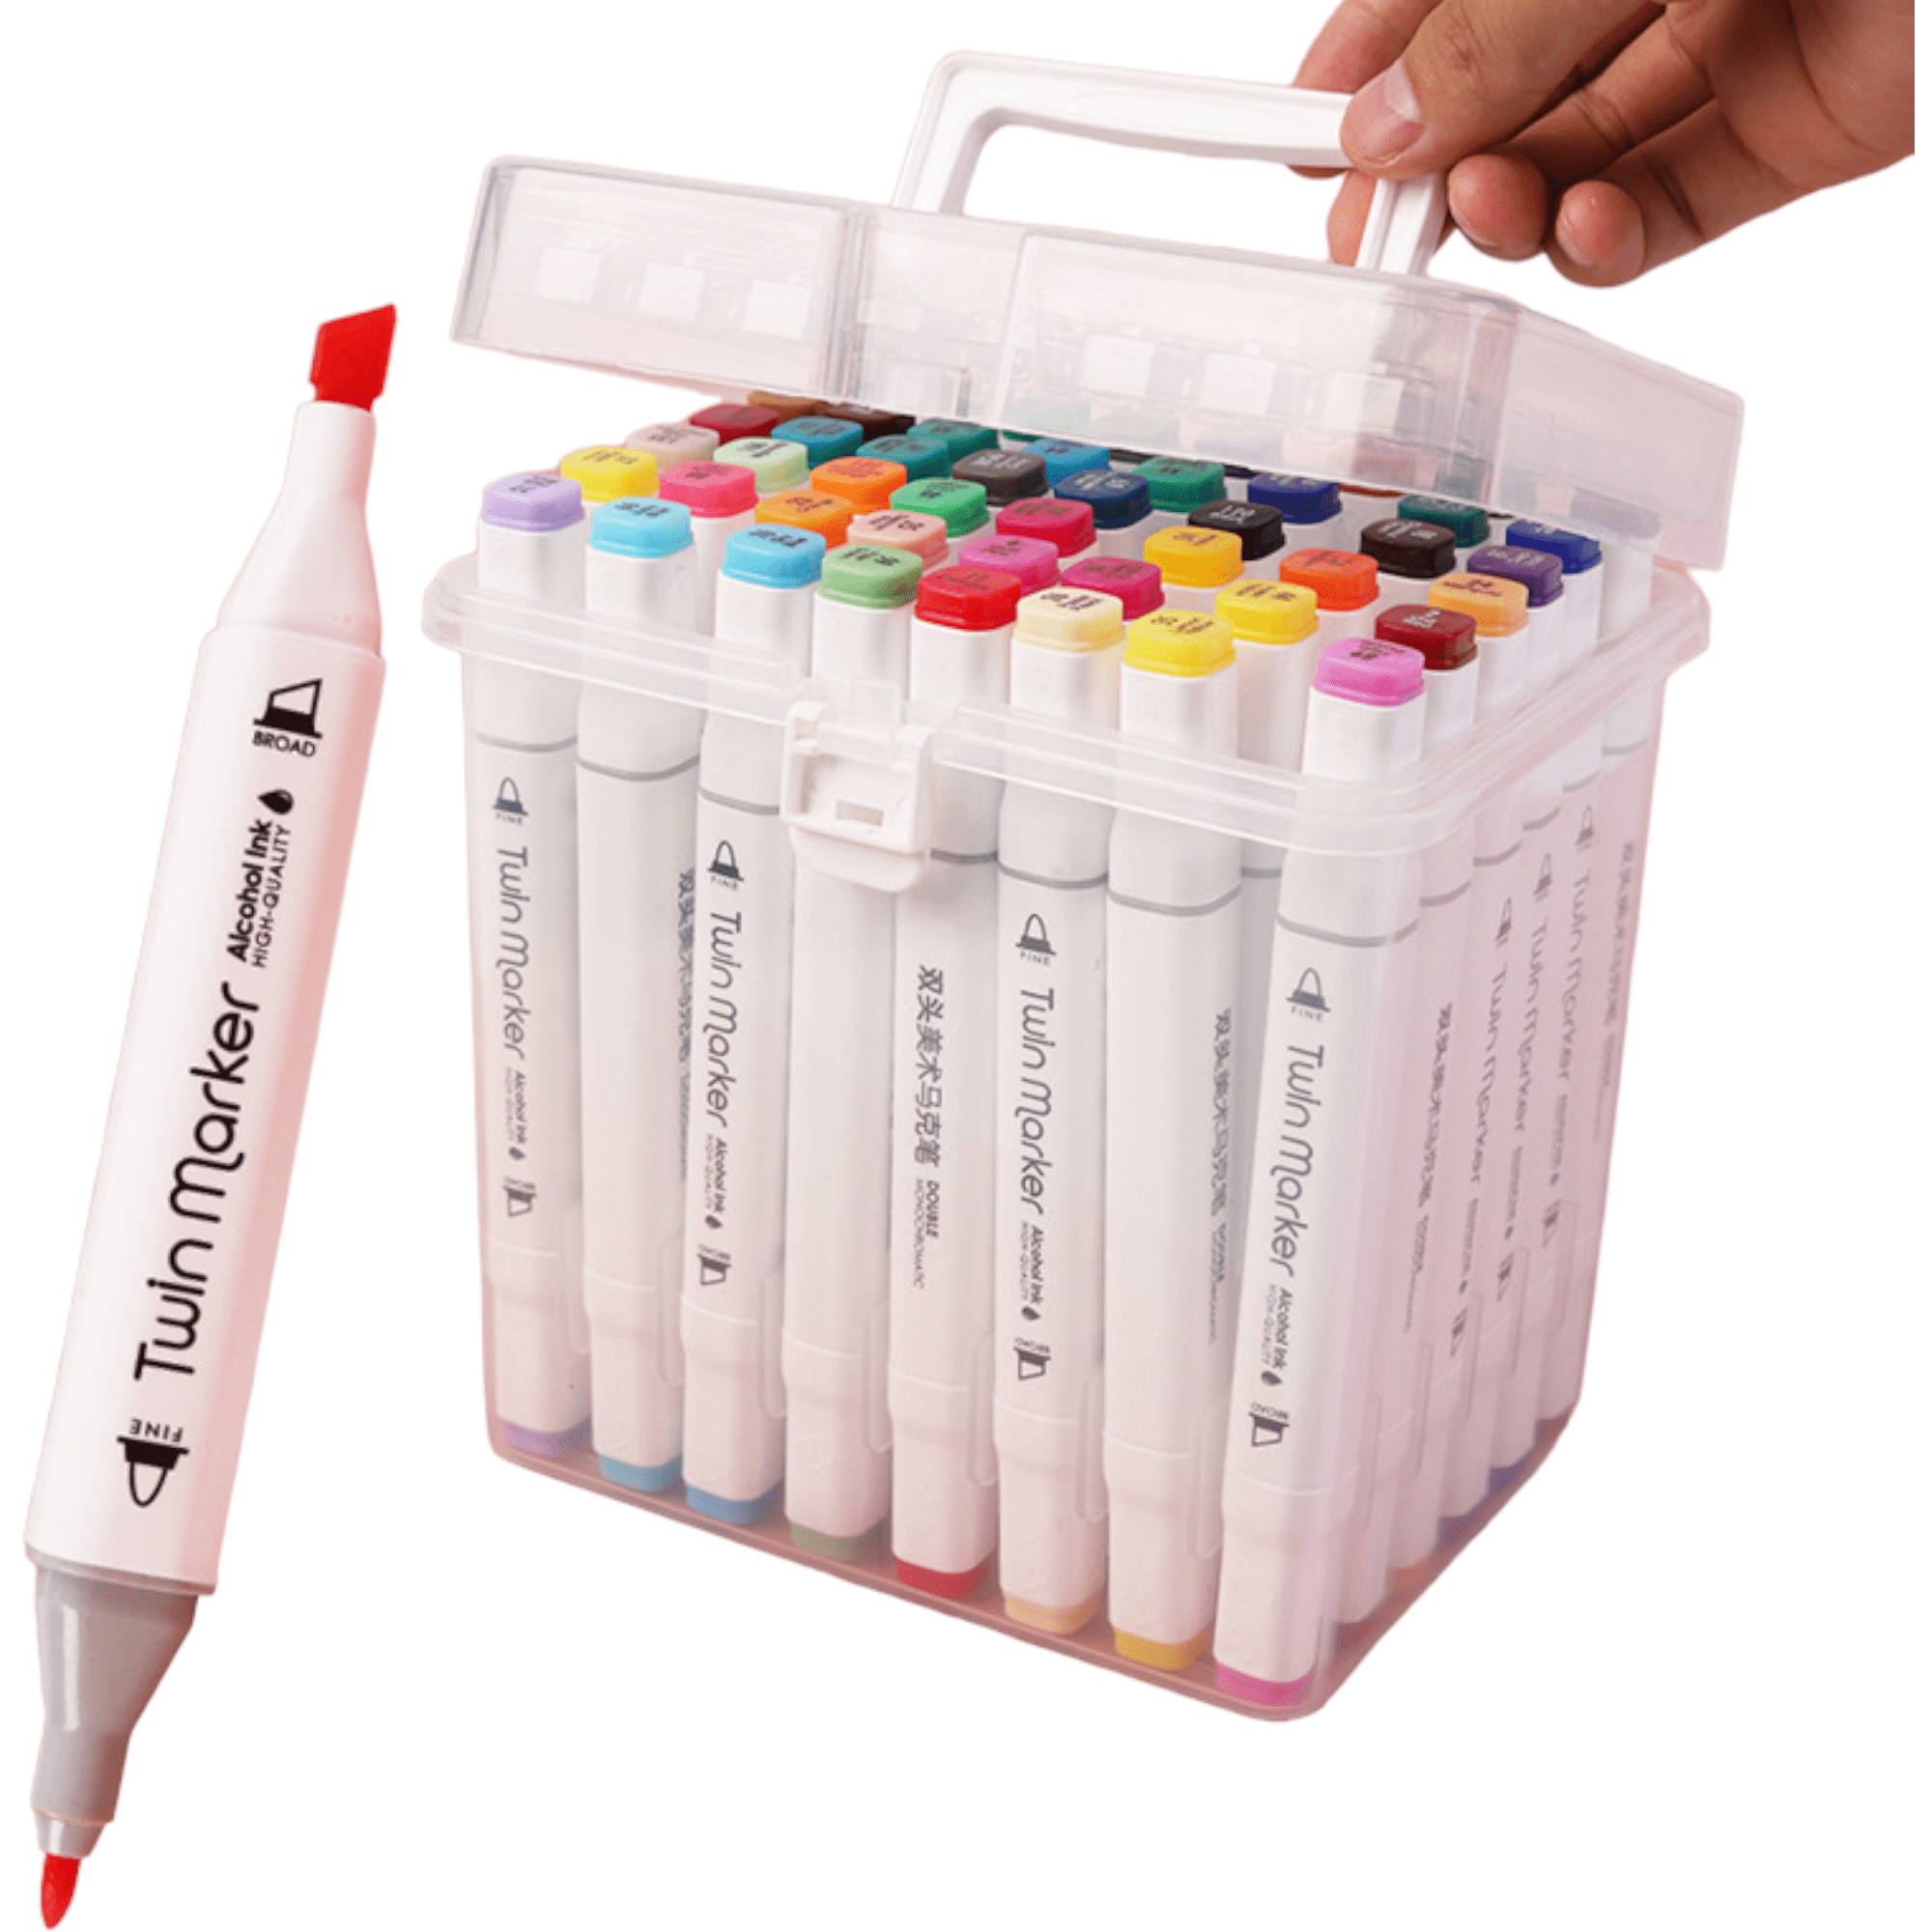 Deli 60 Colors Dual Tip Alcohol Markers, Art Markers Set Art Supplies Permanent Marker with Storage Box